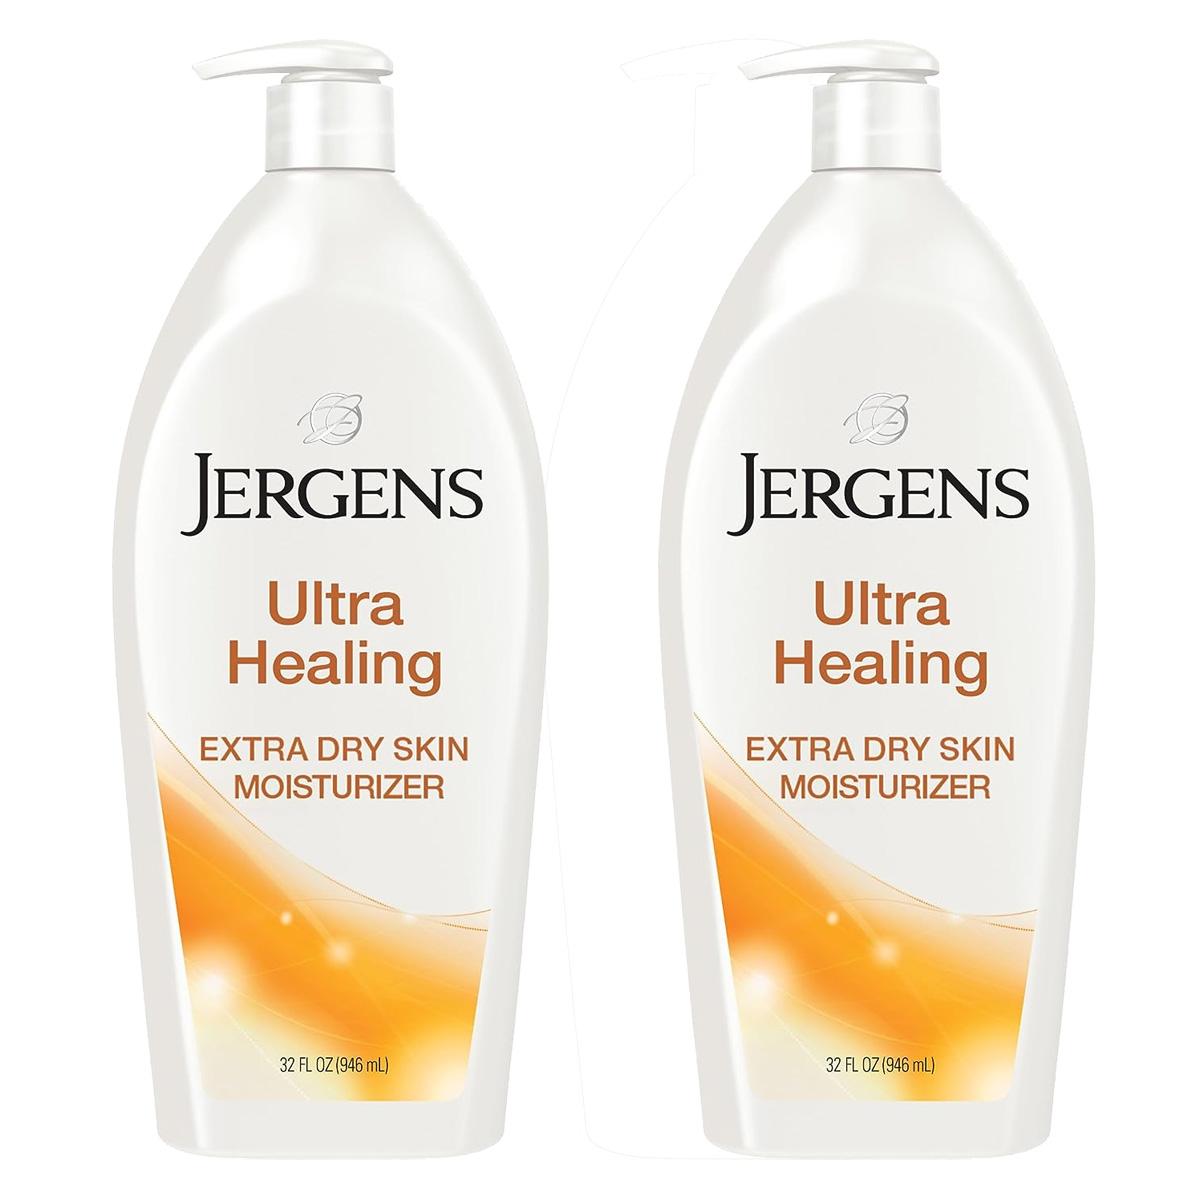 Jergens Ultra Healing Dry Skin Moisturizer Lotion 2 Pack for $8.32 Shipped